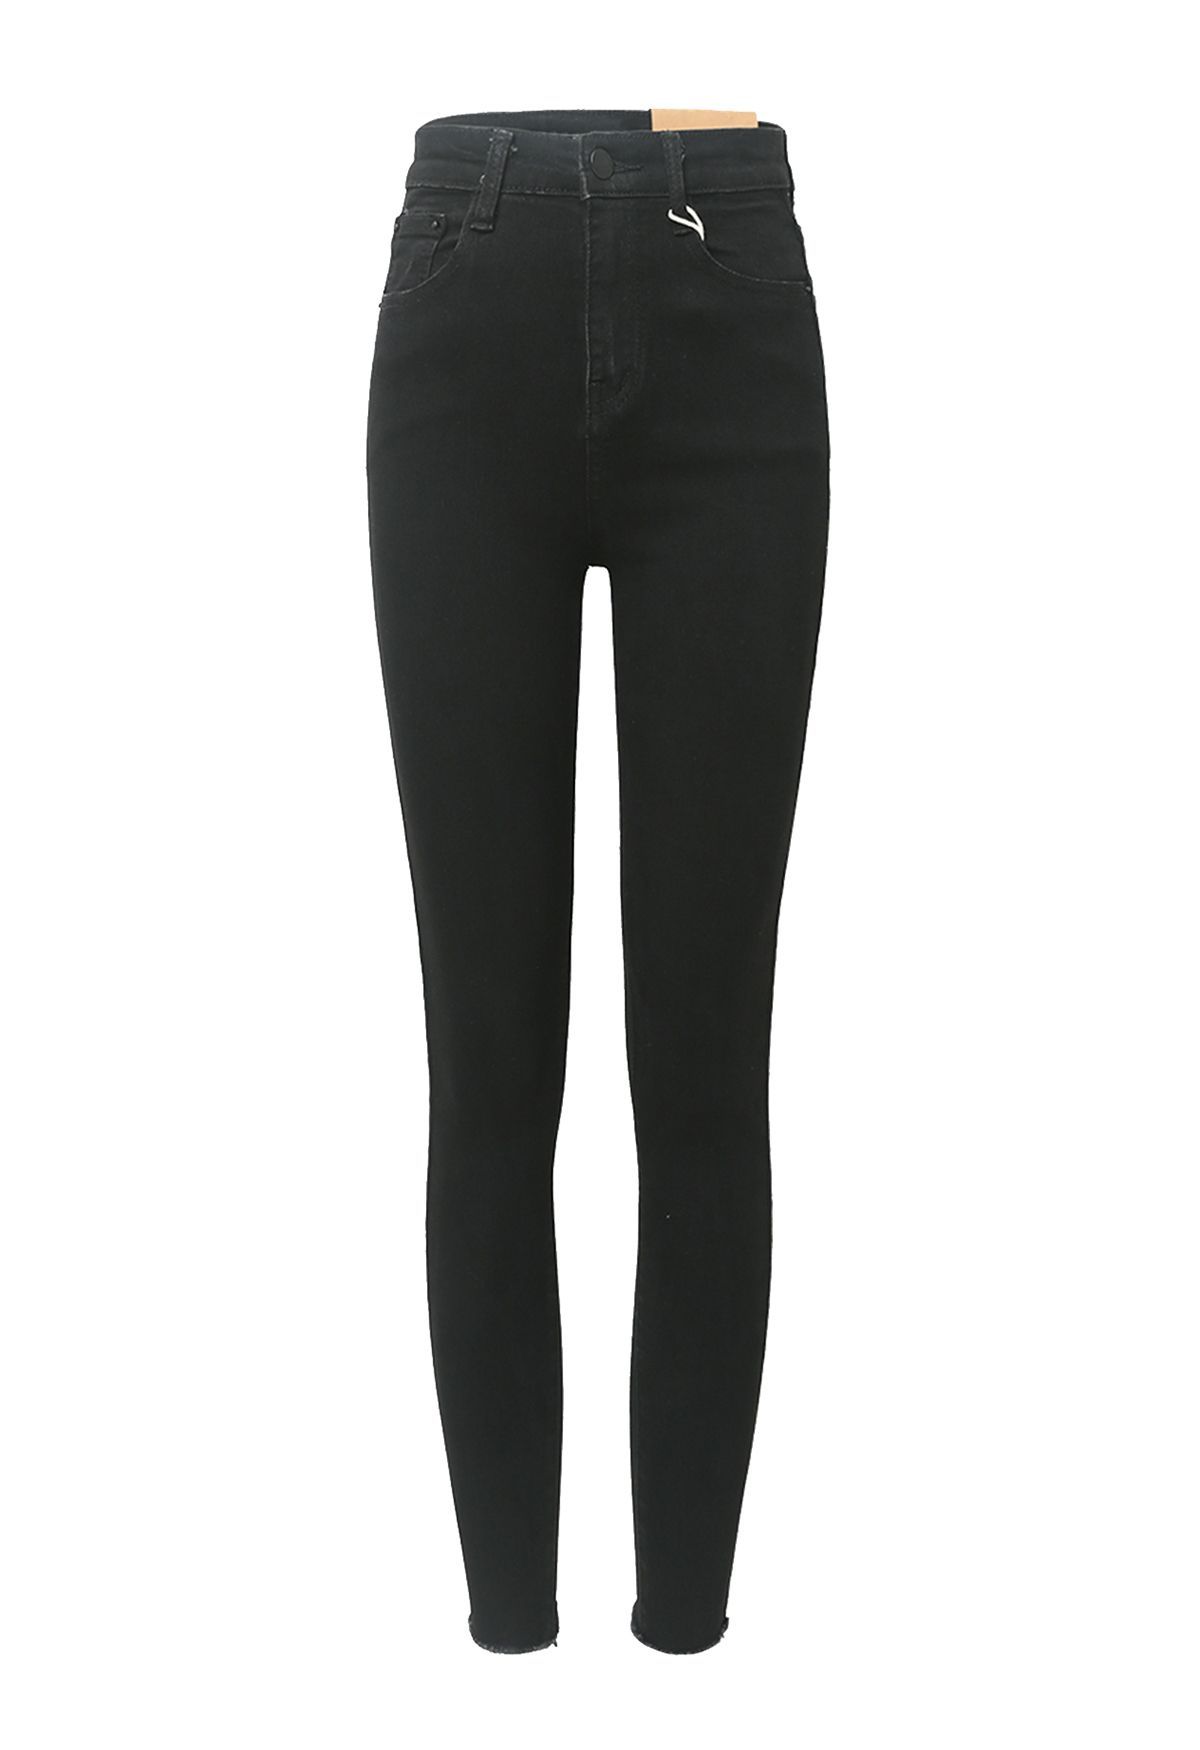 Mysterious Black Crop Skinny Jeans | Chicwish